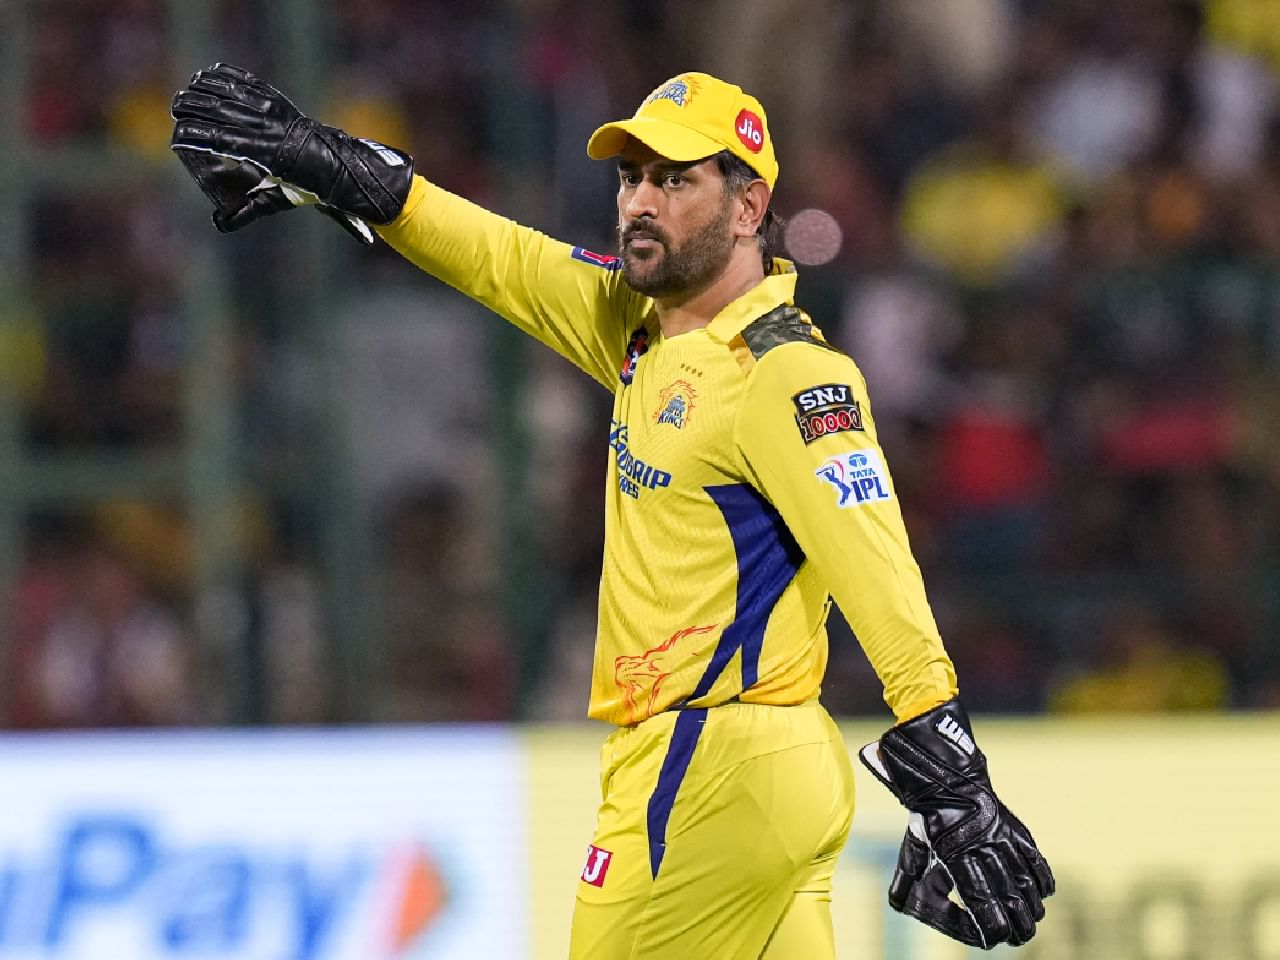 MS Dhoni will be banned if CSK bowlers don